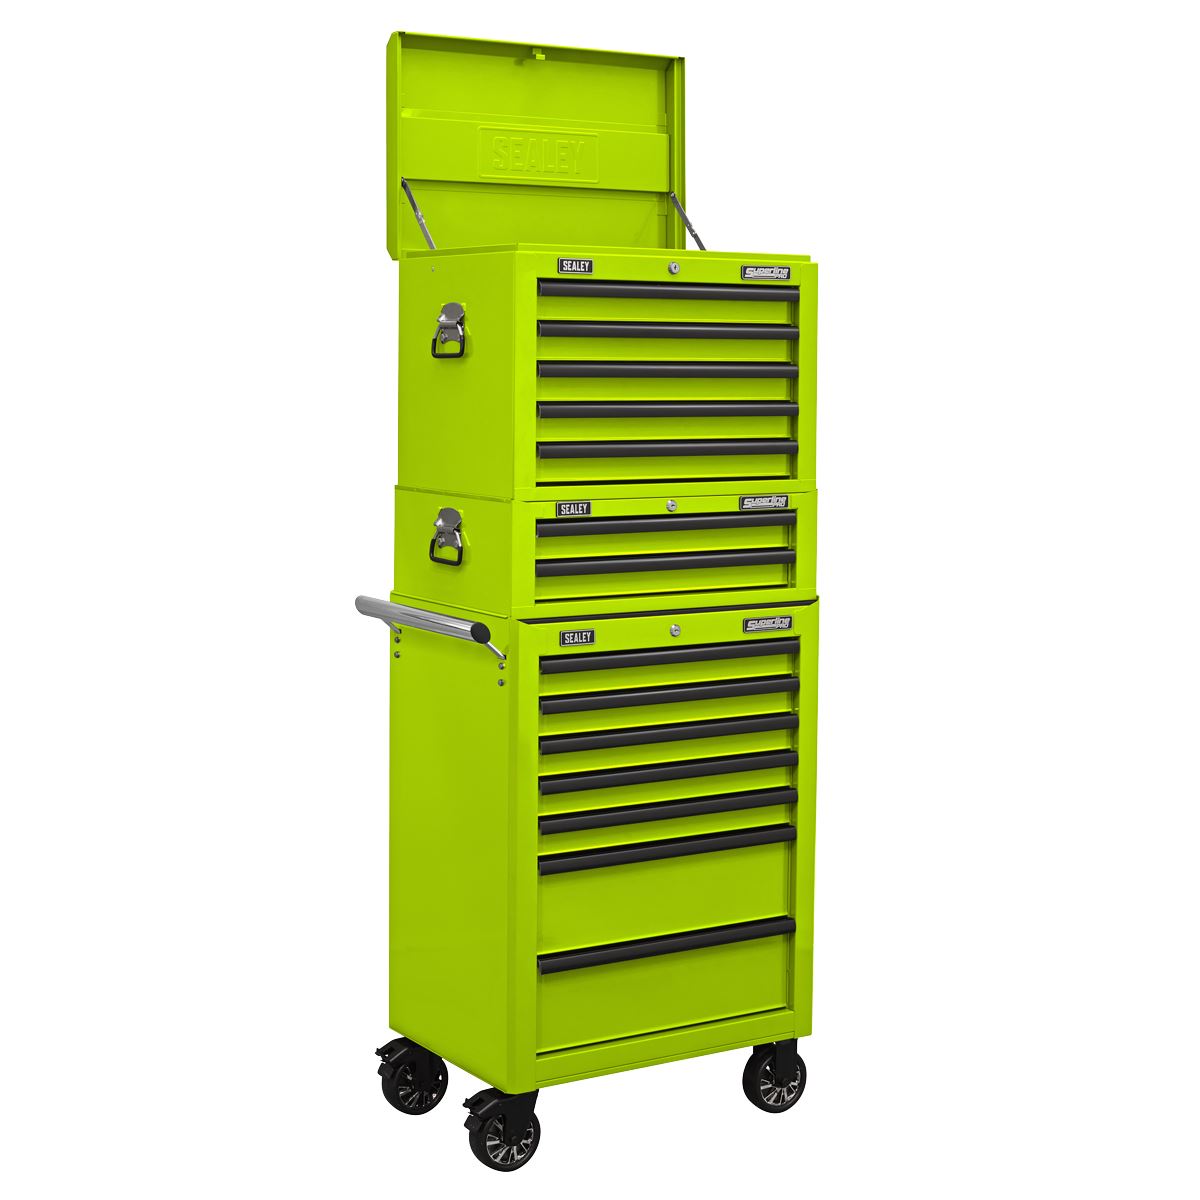 Sealey Superline Pro Topchest, Mid-Box & Rollcab Combination 14 Drawer with Ball-Bearing Slides - Green